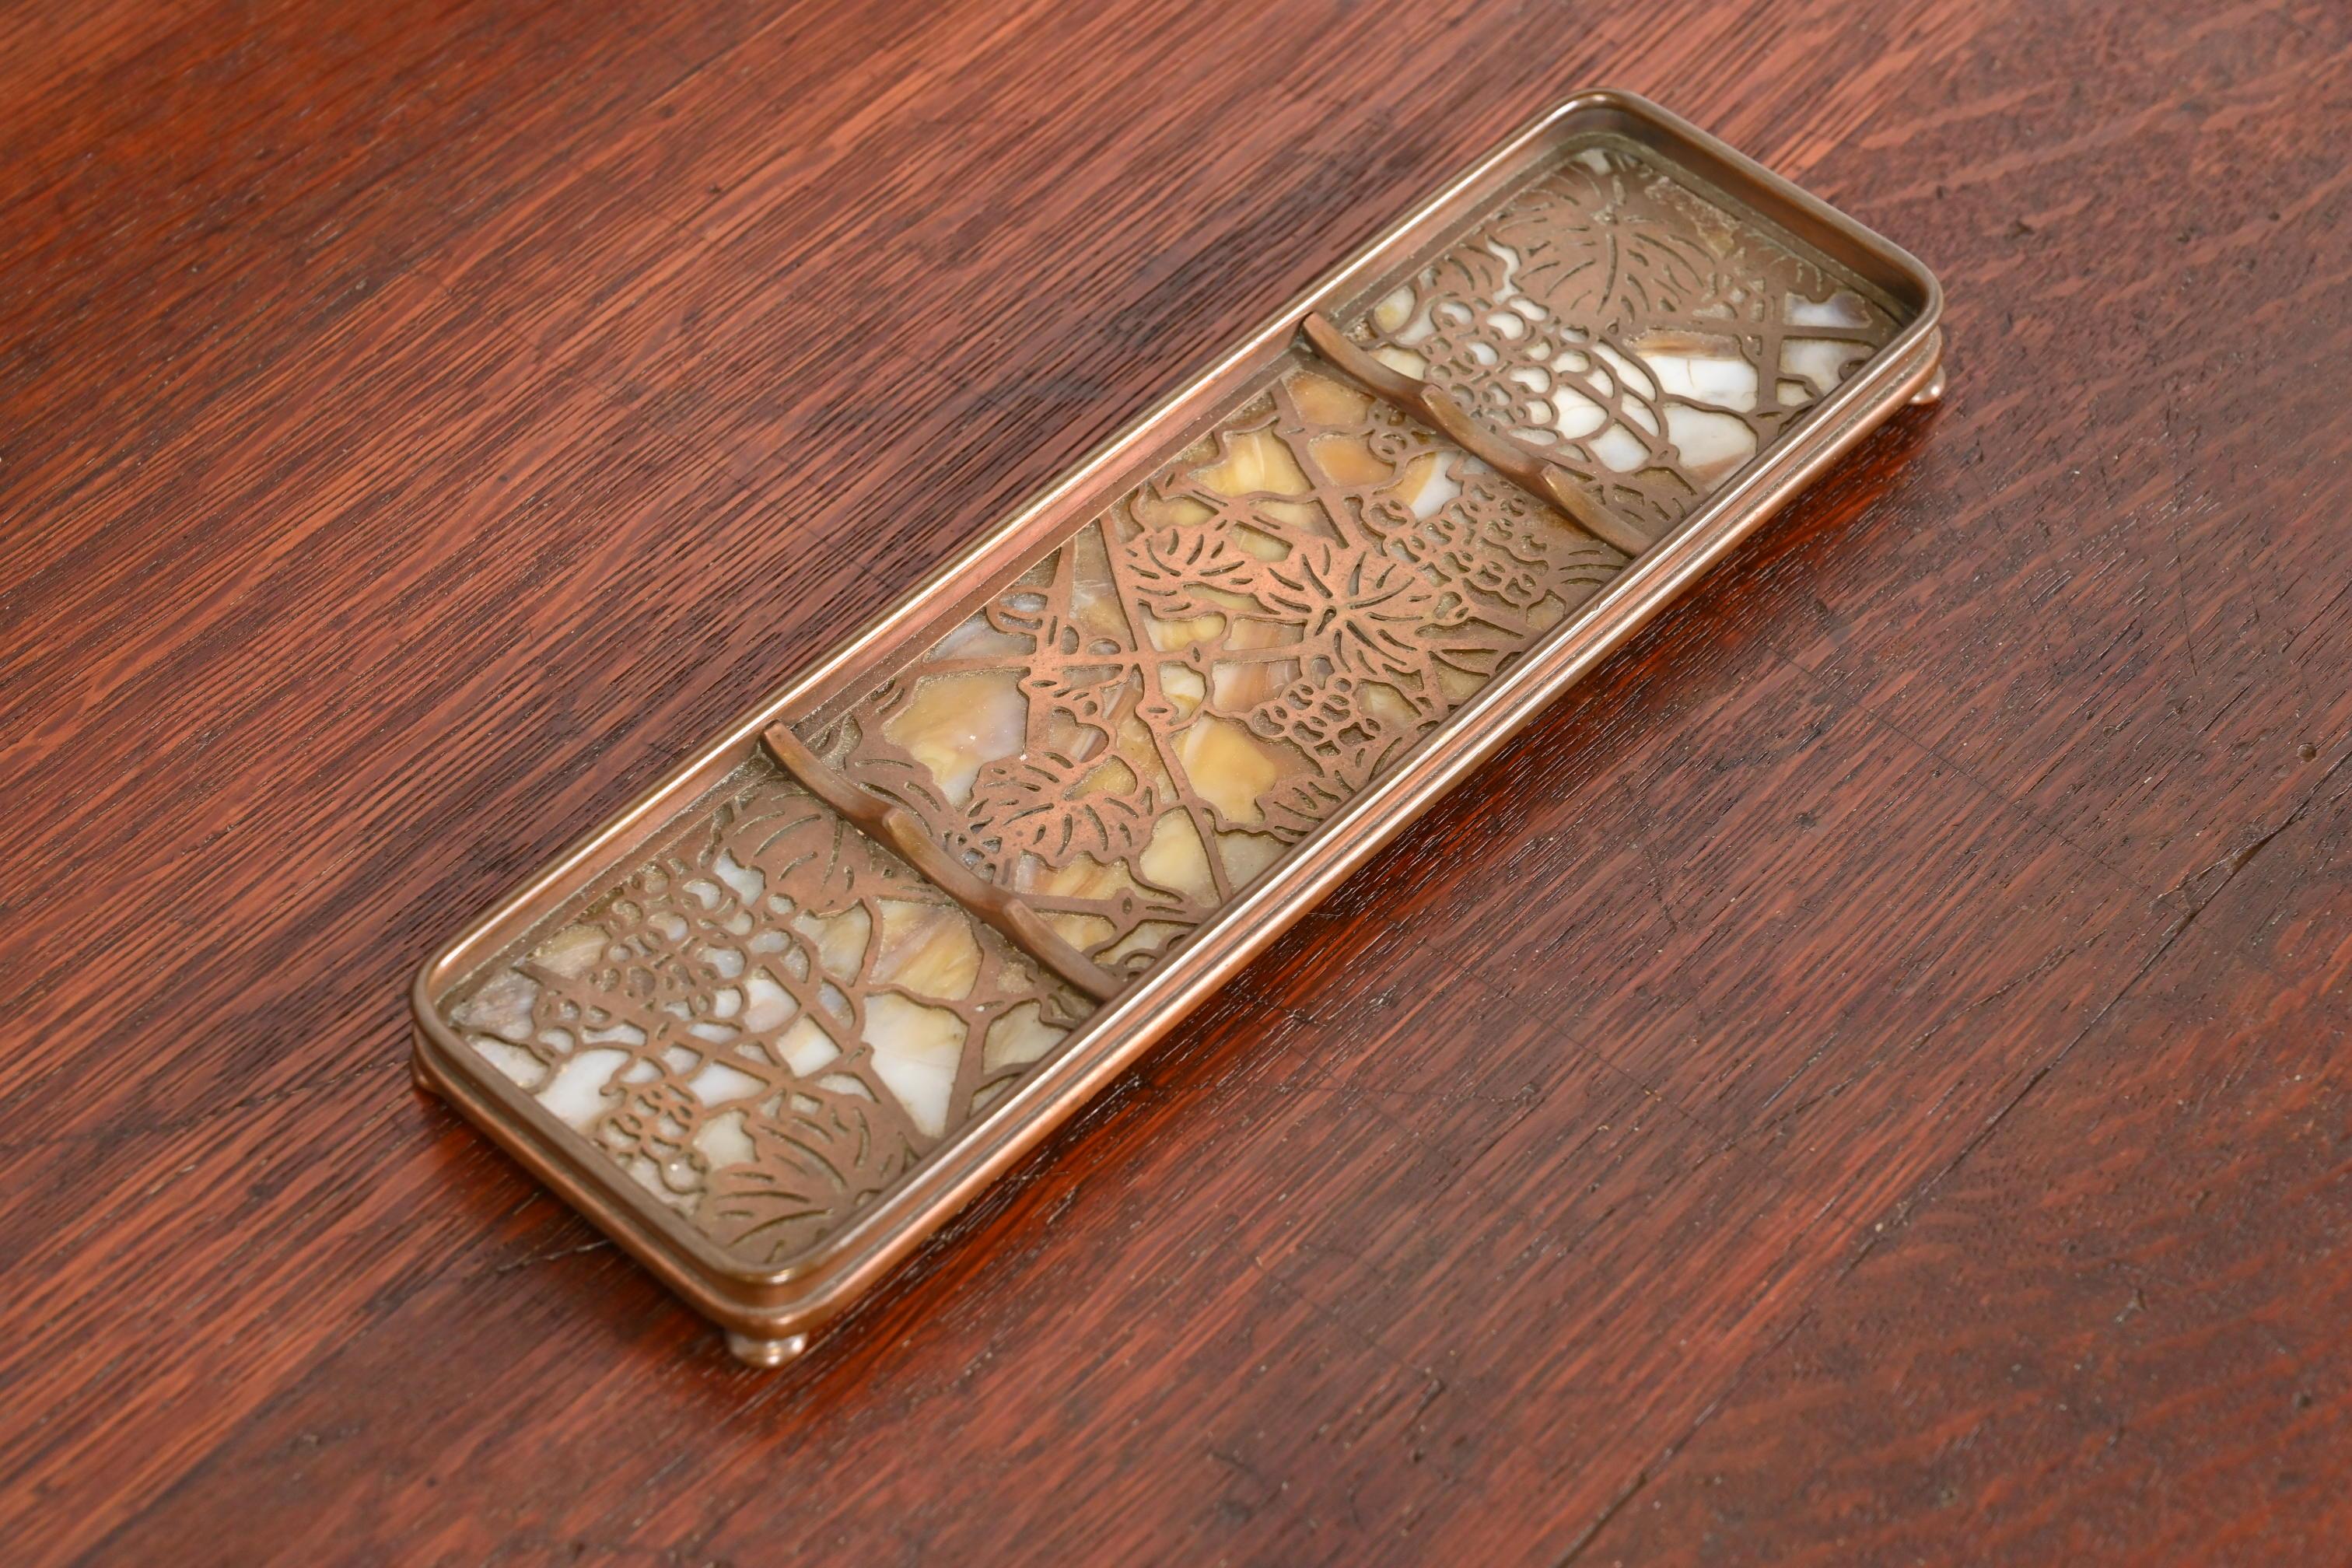 Tiffany Studios New York Grapevine Bronze and Slag Glass Pen Tray, Circa 1910 In Good Condition For Sale In South Bend, IN